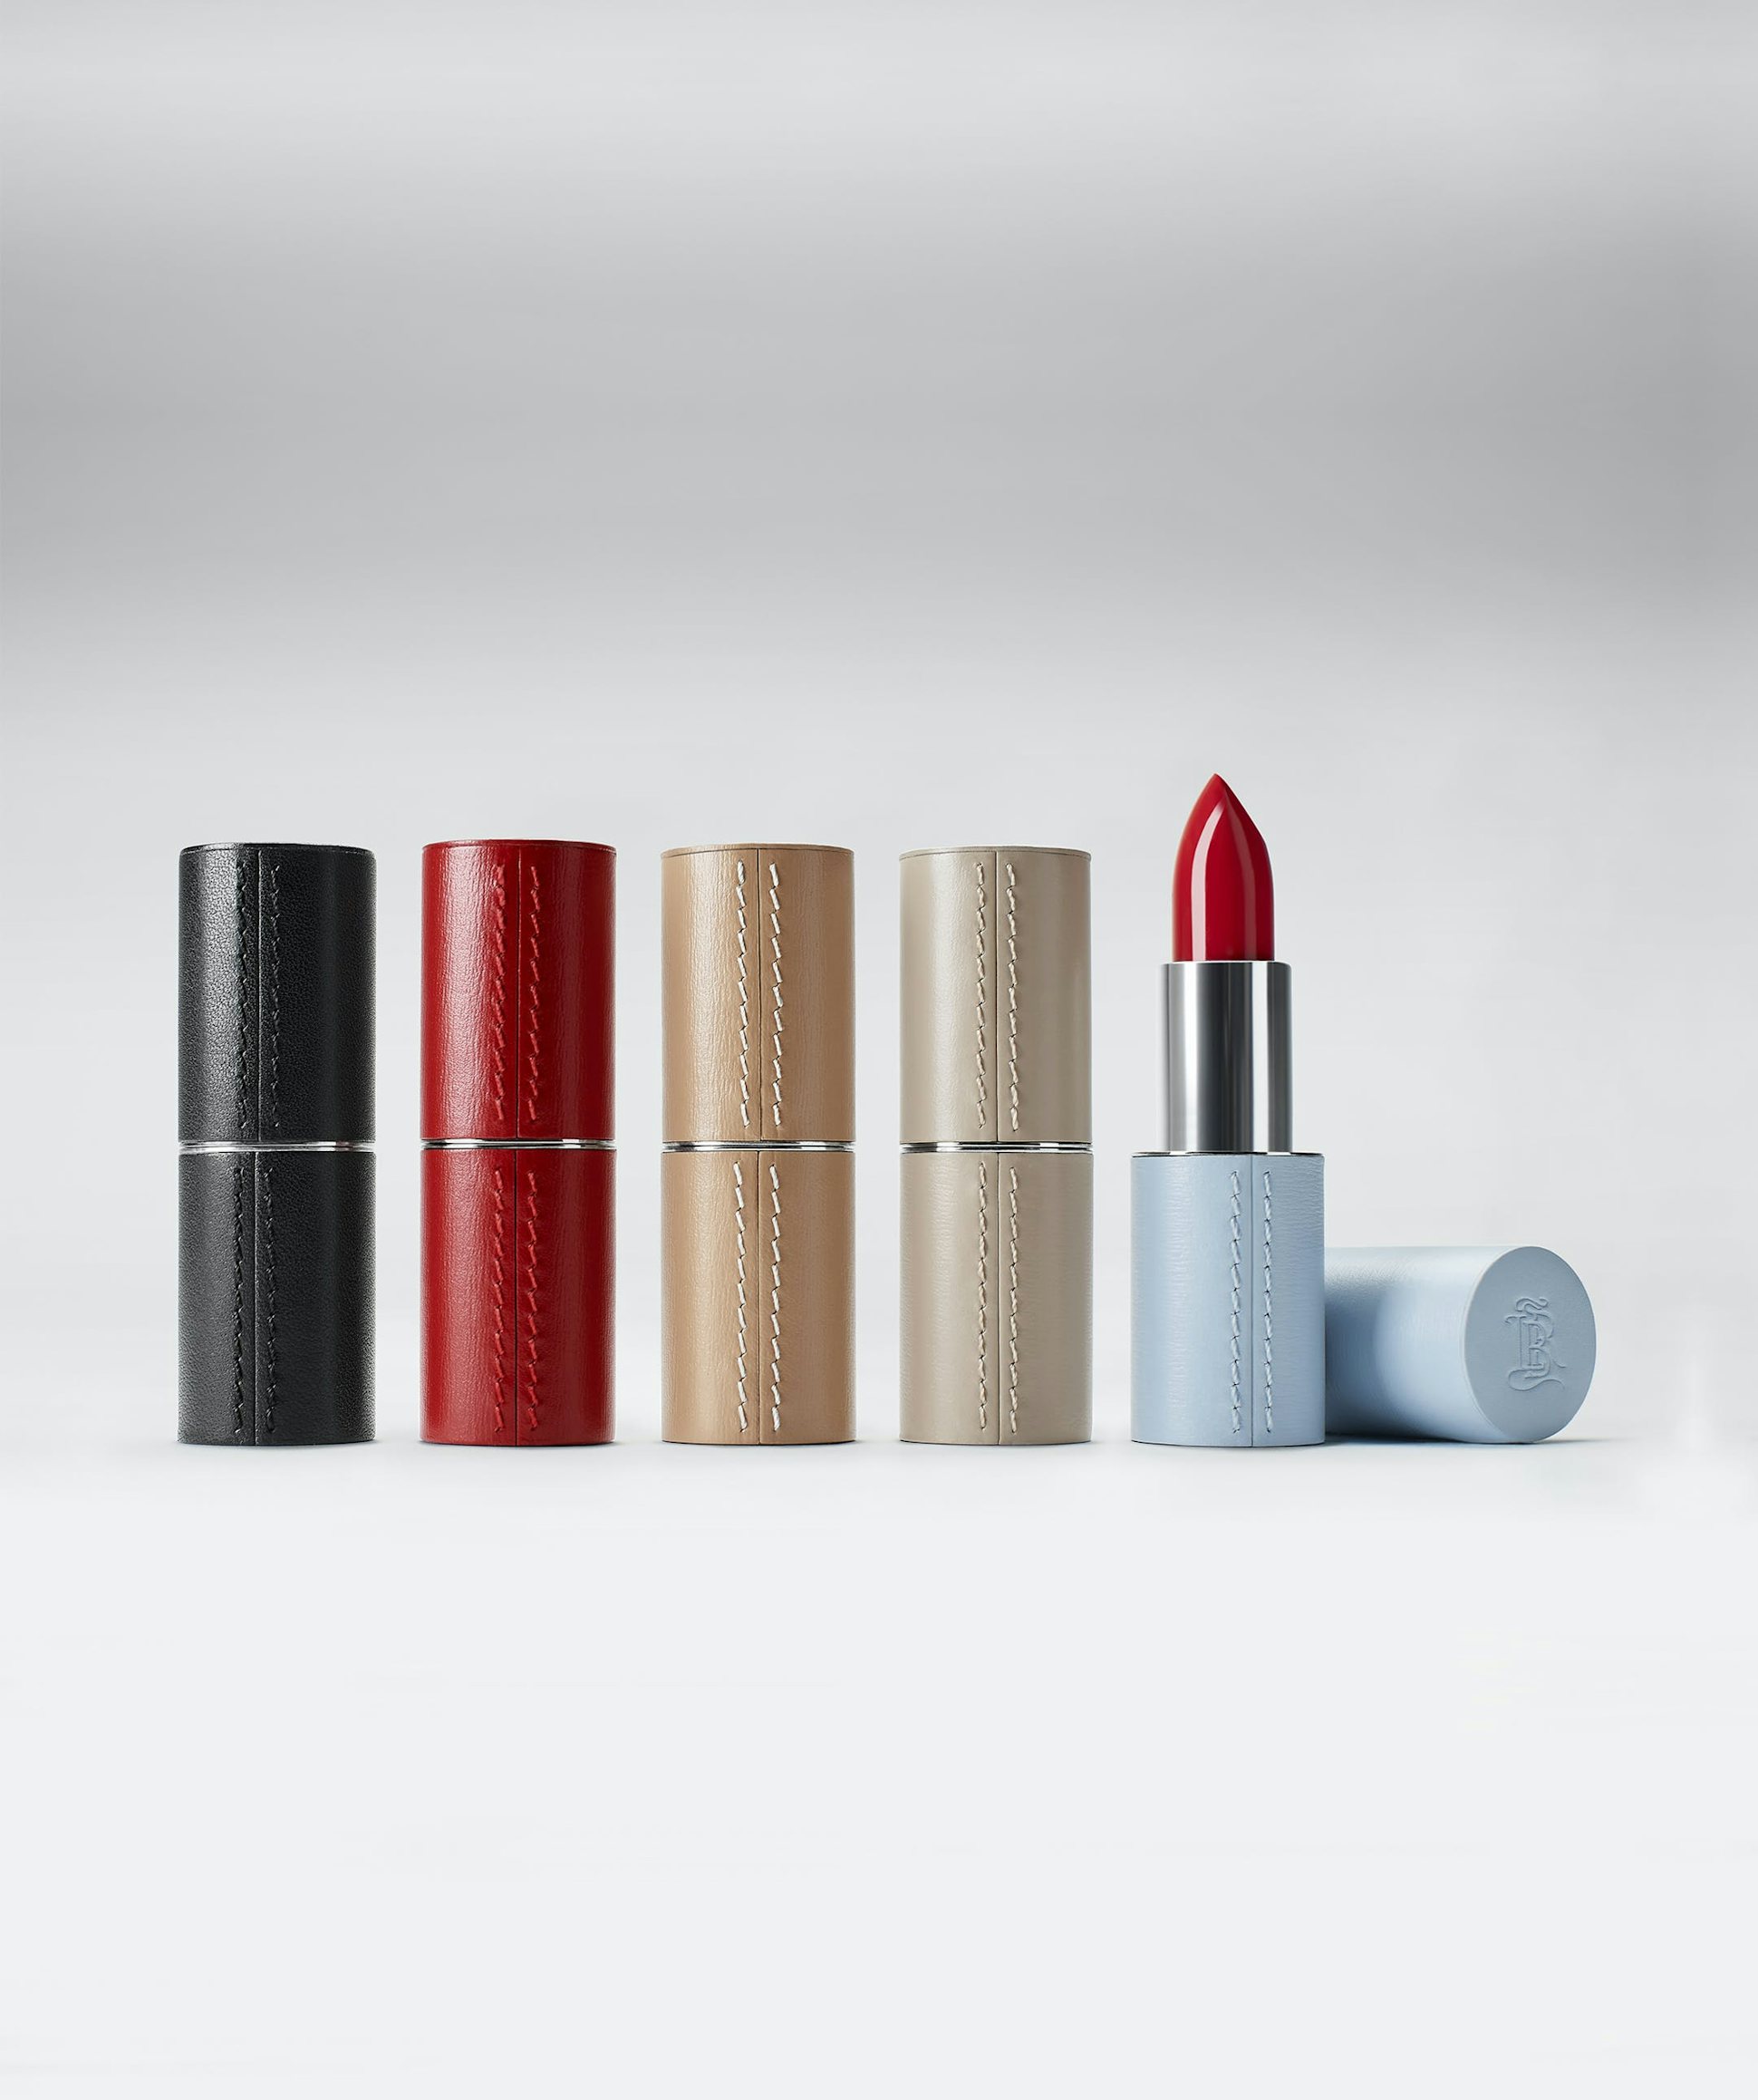 La bouche rouge fine leather lipstick case family with the black, red, camel, beige and blue case with a red lipstick shade